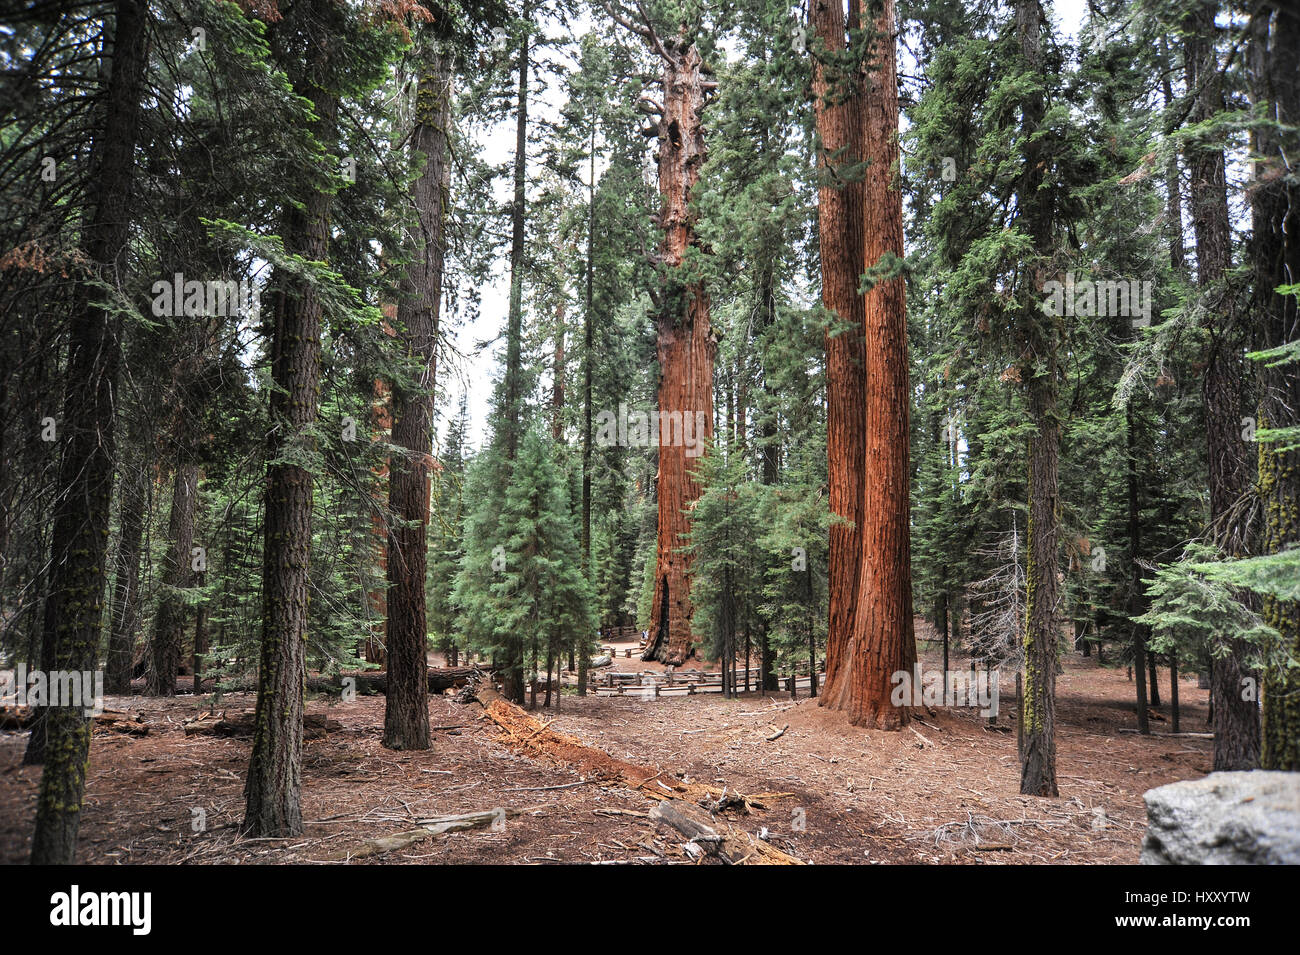 Sequoia National Park, California, United States Banque D'Images